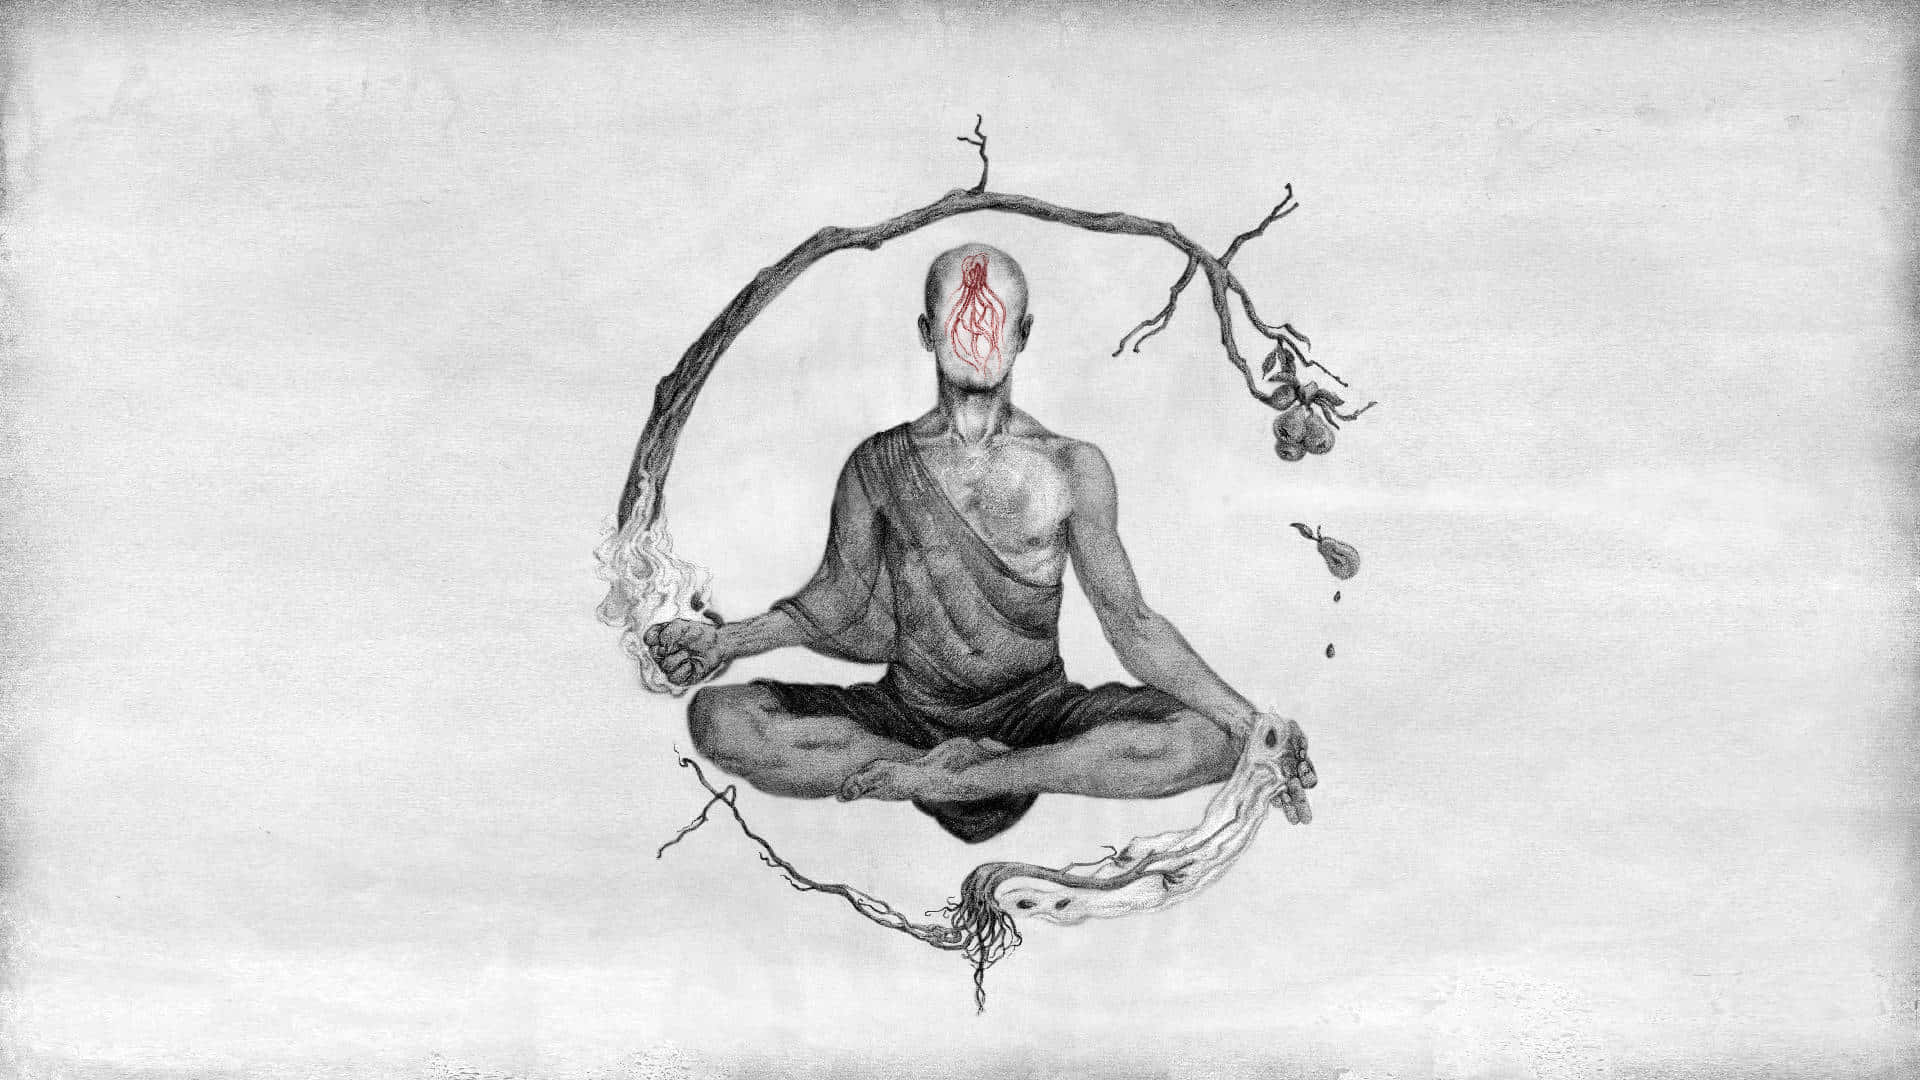 A Drawing Of A Man In A Lotus Position